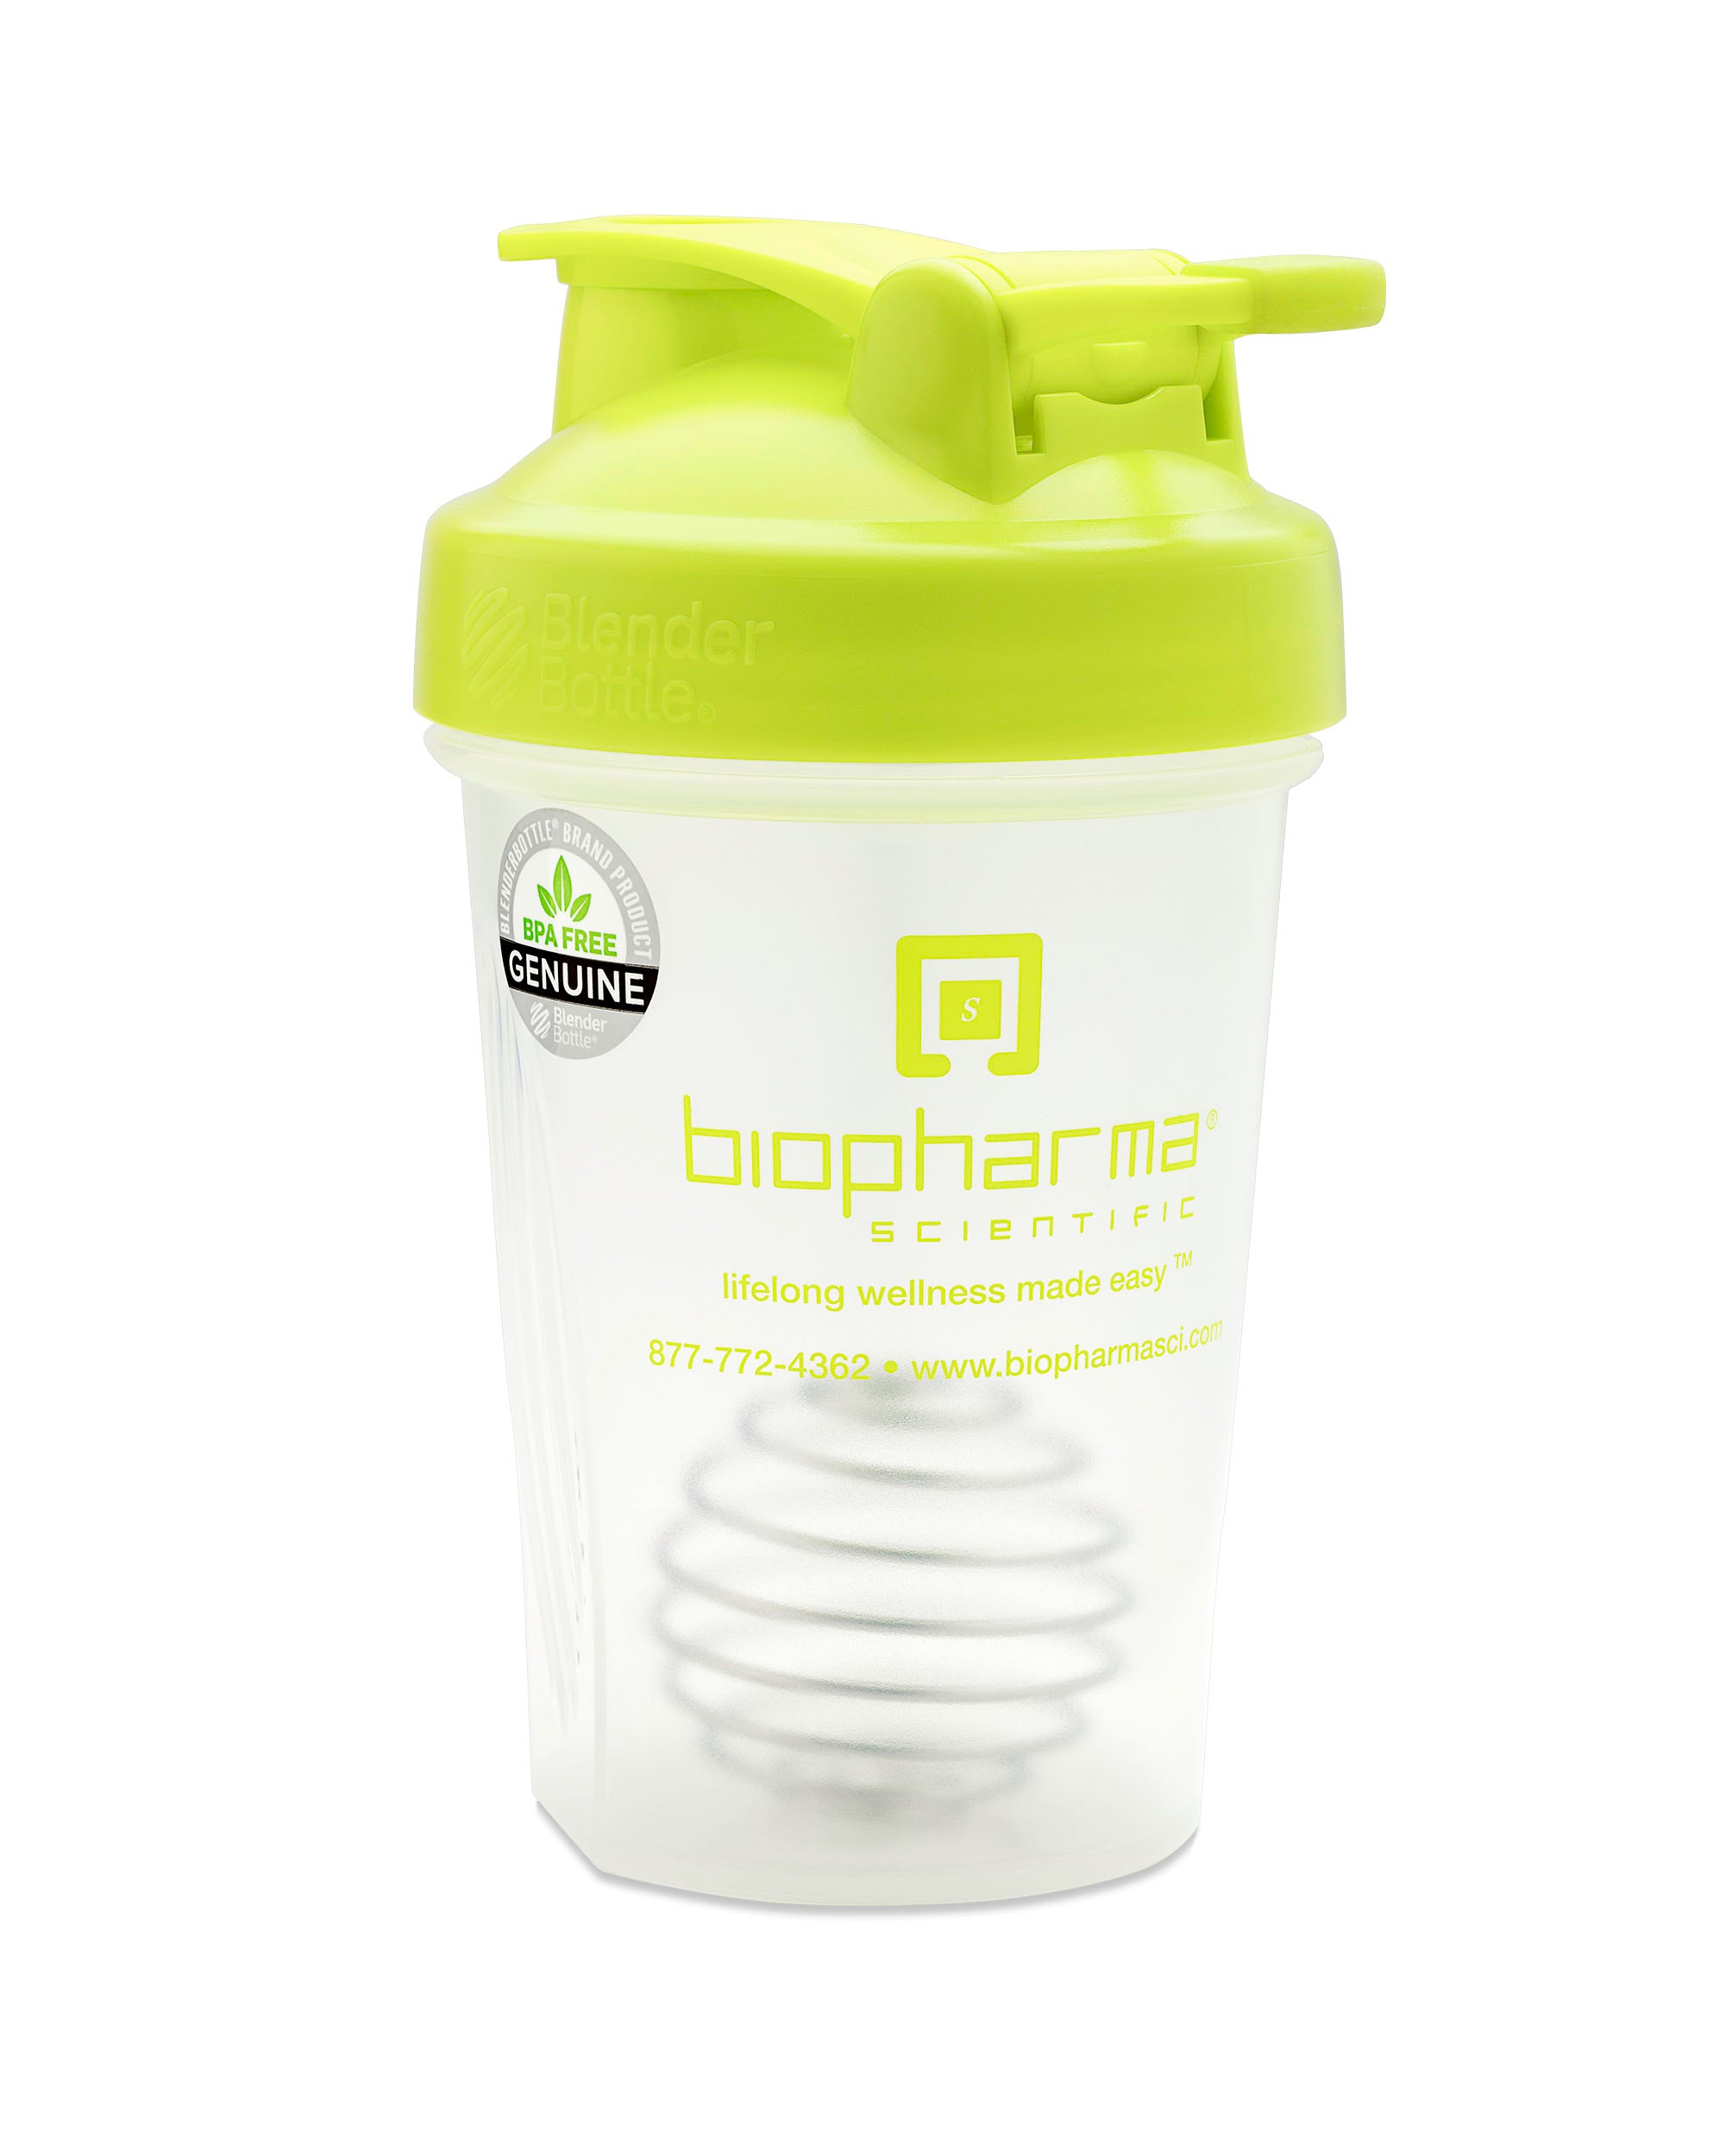 Xrated Body Engineering Xrated Blender Bottle Shaker Cup (20 oz)